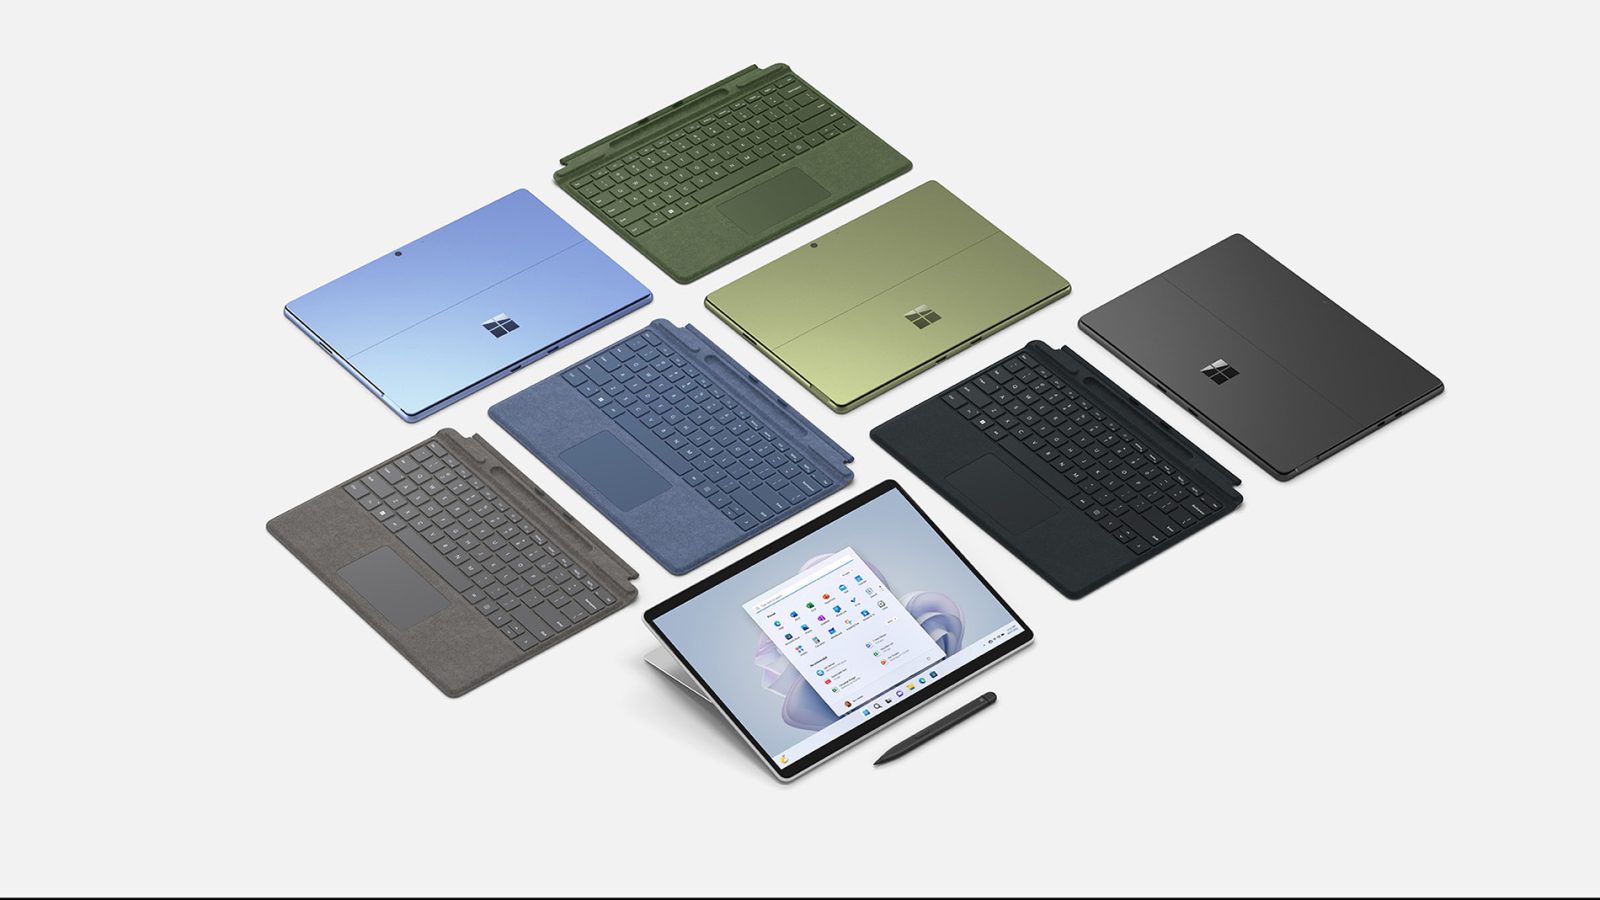 Microsoft Surface Pro 9 plus keyboard in four new colors arranged together